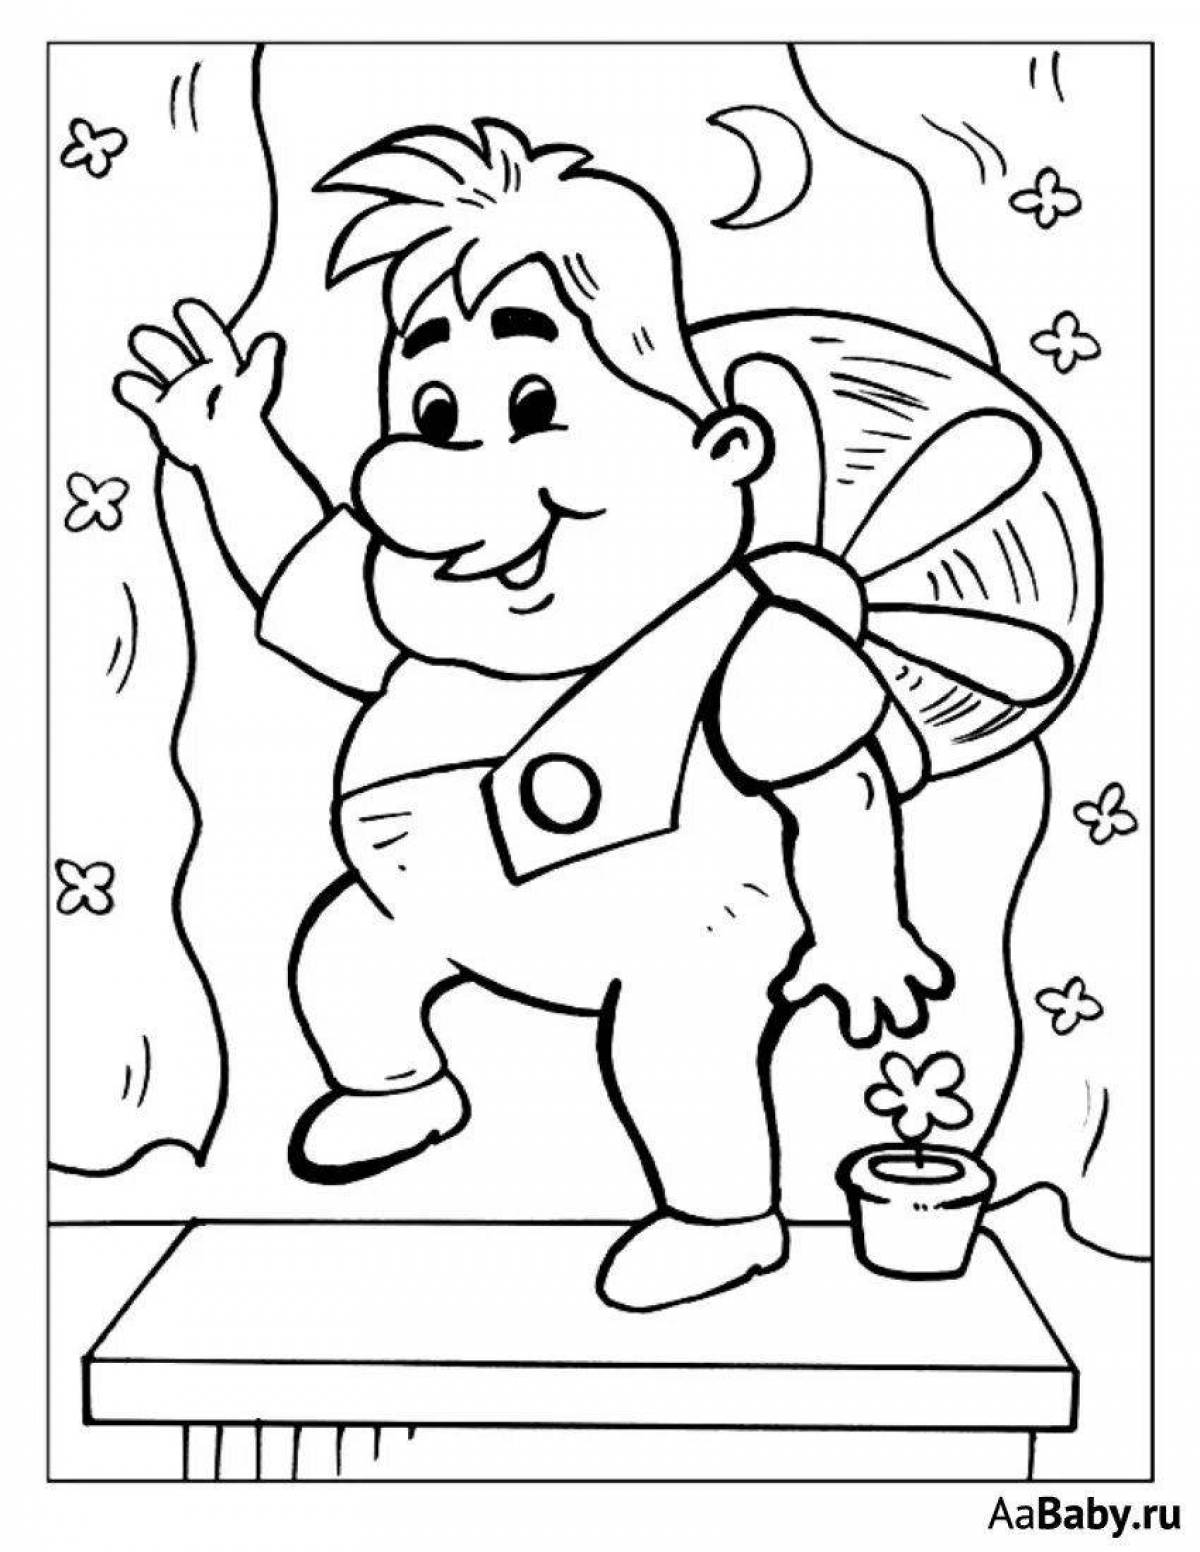 Charming carlson coloring page